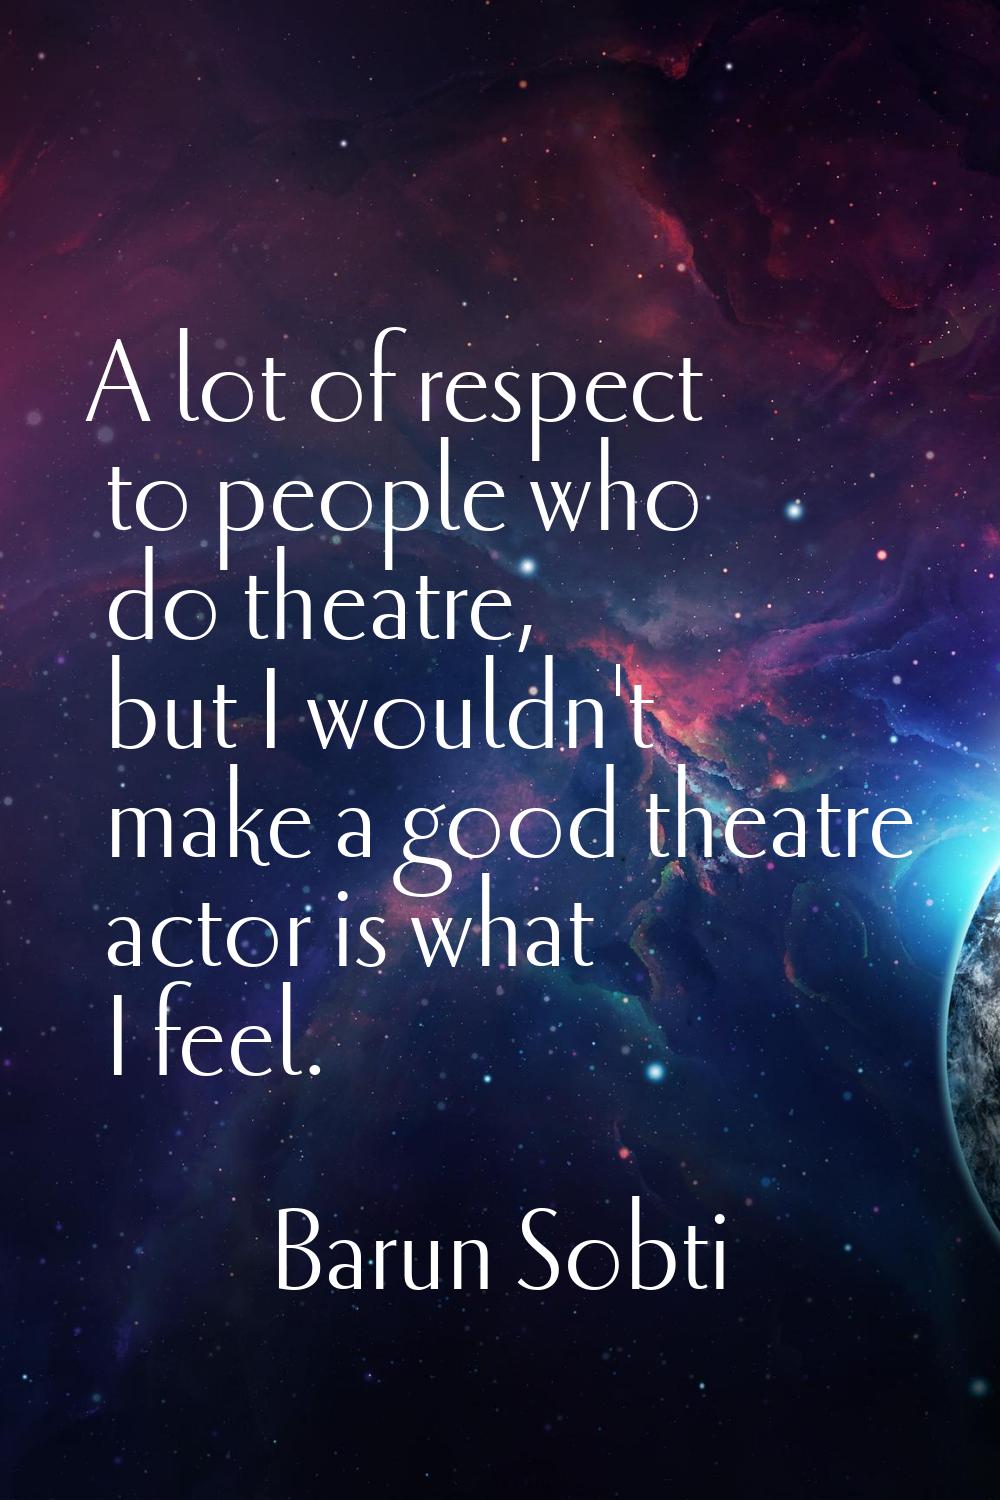 A lot of respect to people who do theatre, but I wouldn't make a good theatre actor is what I feel.